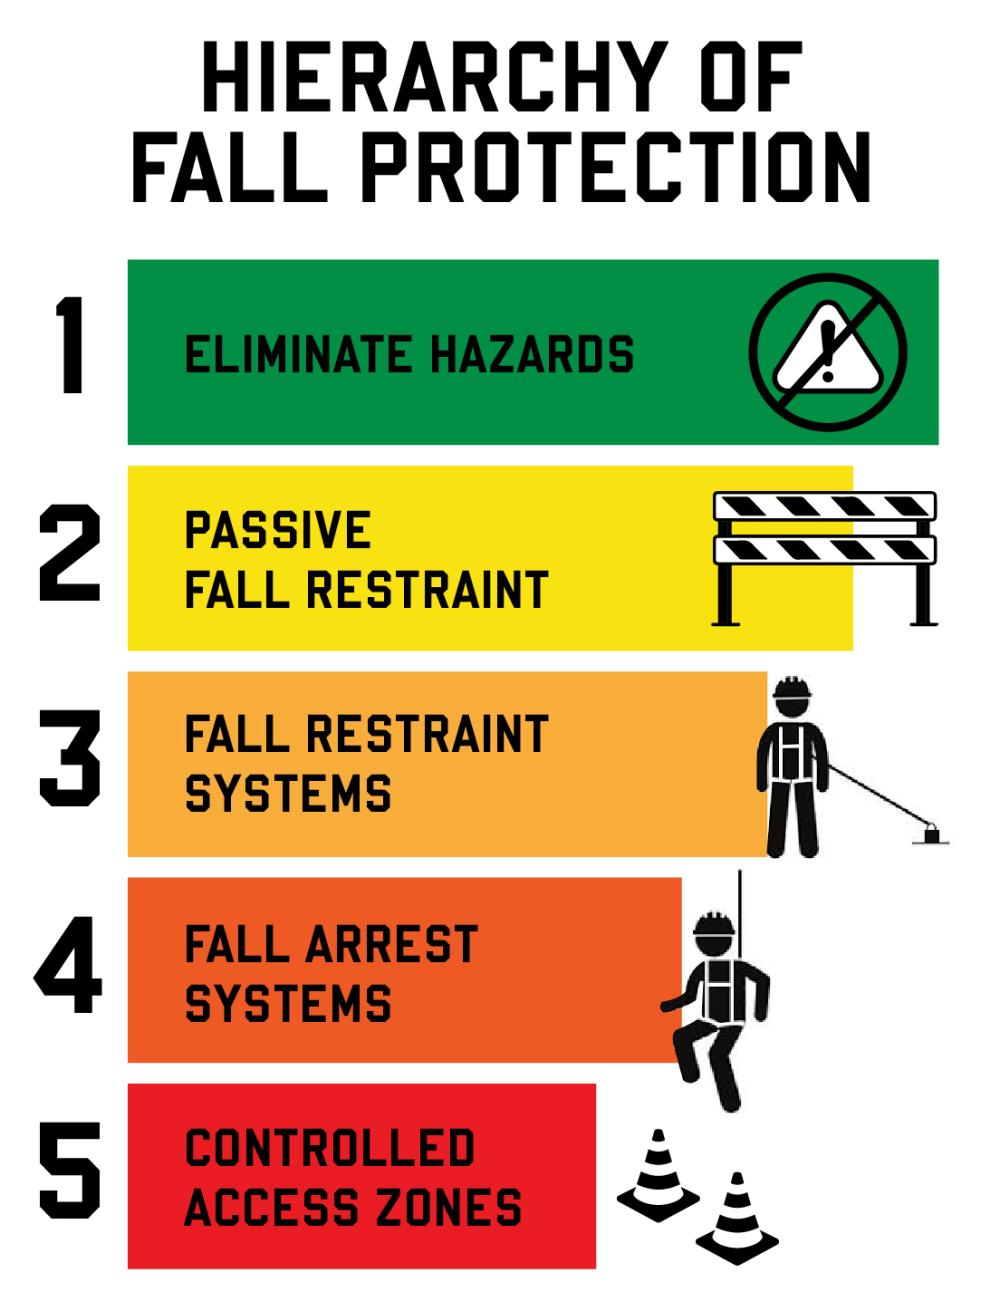 hierarchy of fall protection: eliminate hazards, passive fall restraint, fall restraint systems, fall arrest systems, controlled access zones